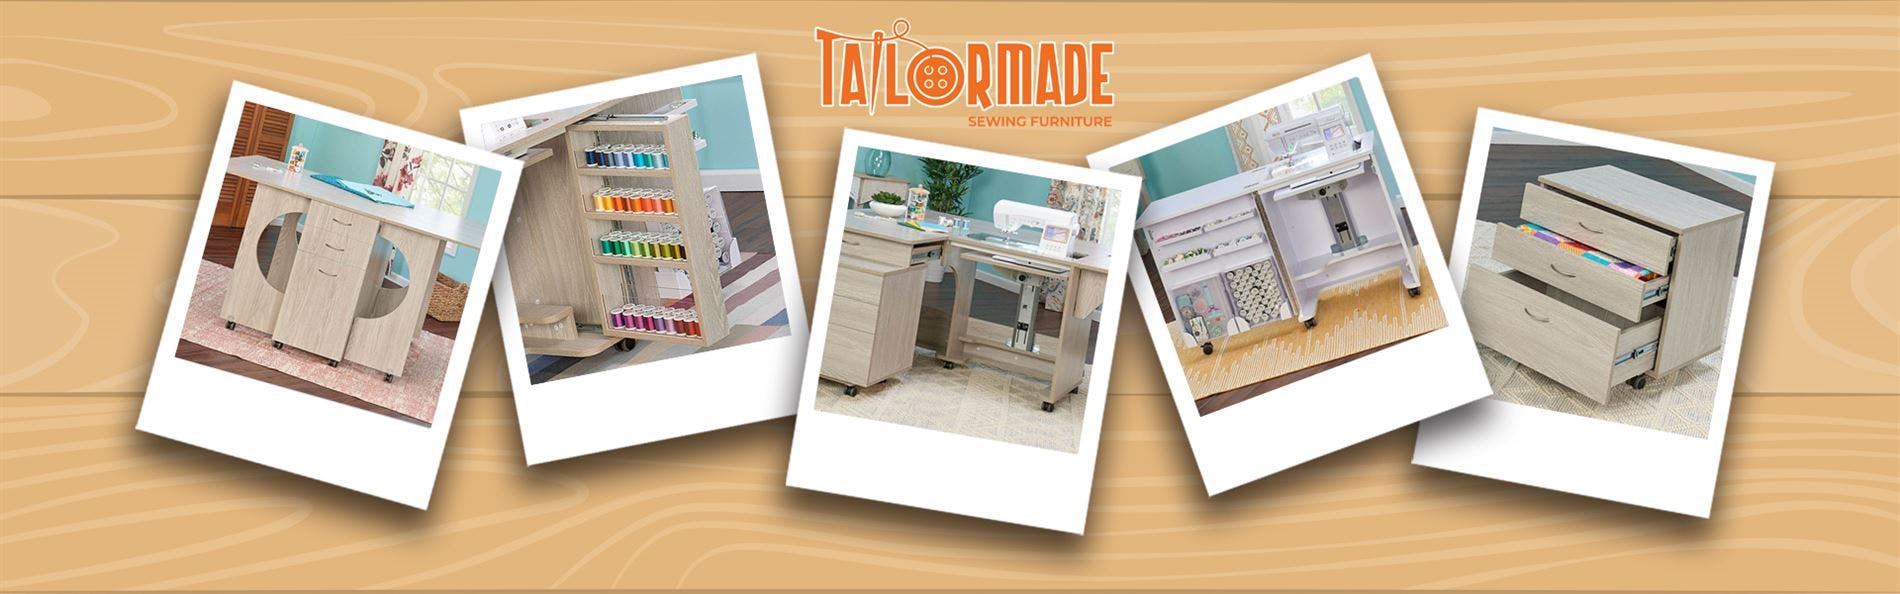 Tailormade sewing furniture banner